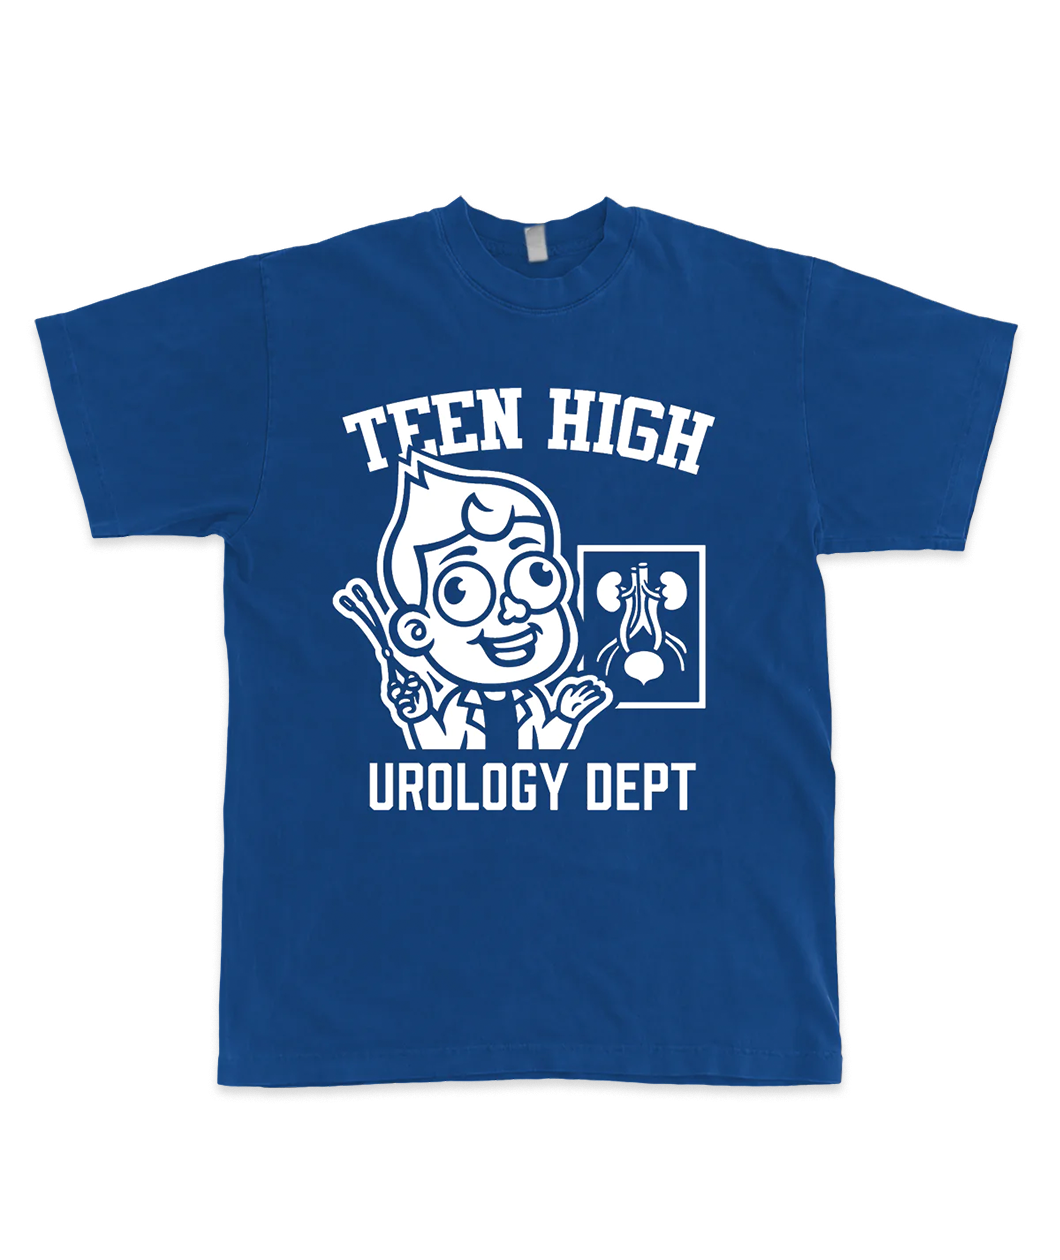 Blue T-shirt with white screenprinted design of a professor pointing to a poster of kidneys and a bladder that says TEEN HIGH UROLOGY DEPT